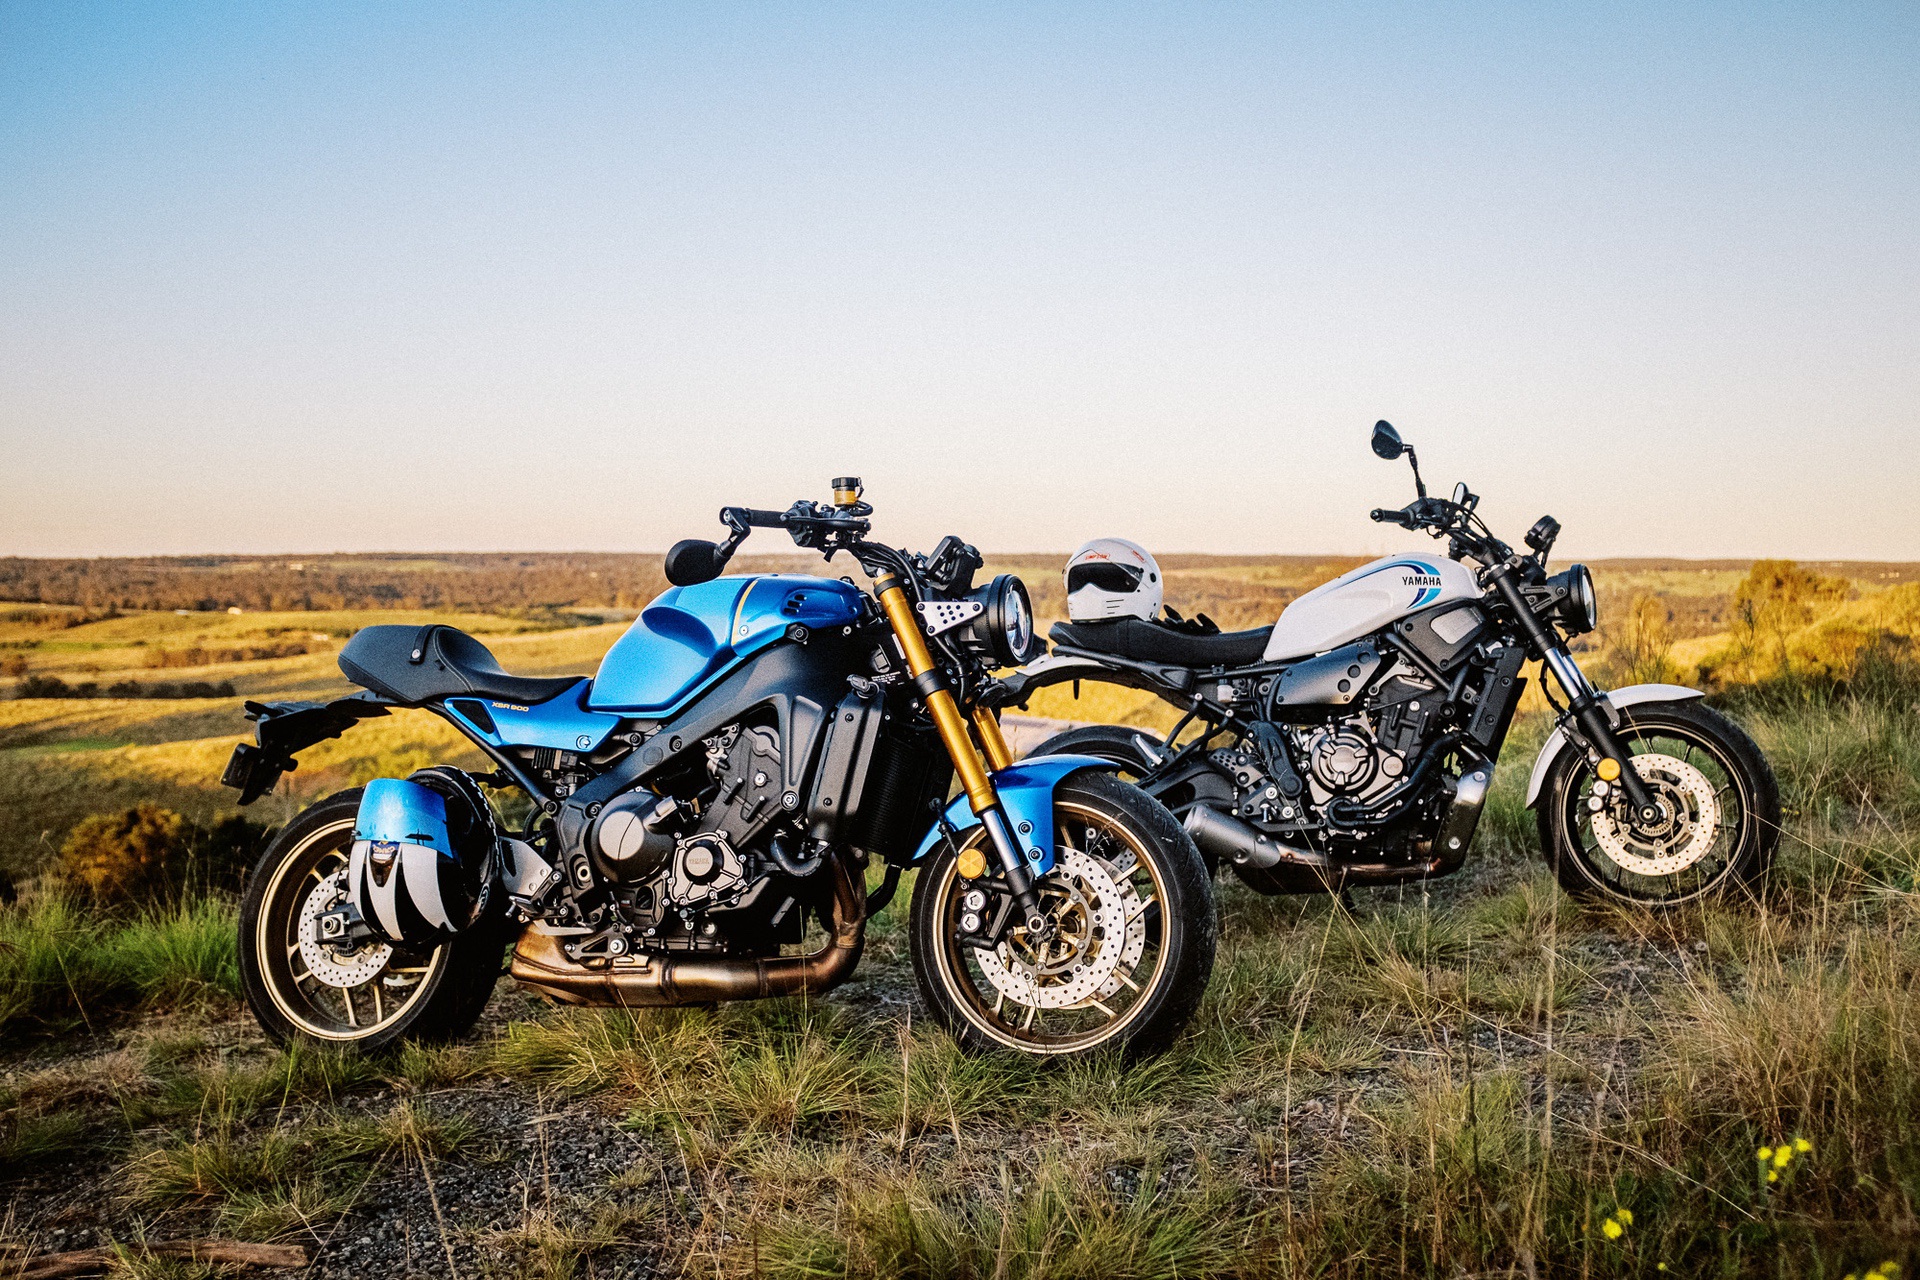 The 2022 Yamaha XSR900 and XSR700 motorcycles at dusk on the outskirts of Sydney, Australia